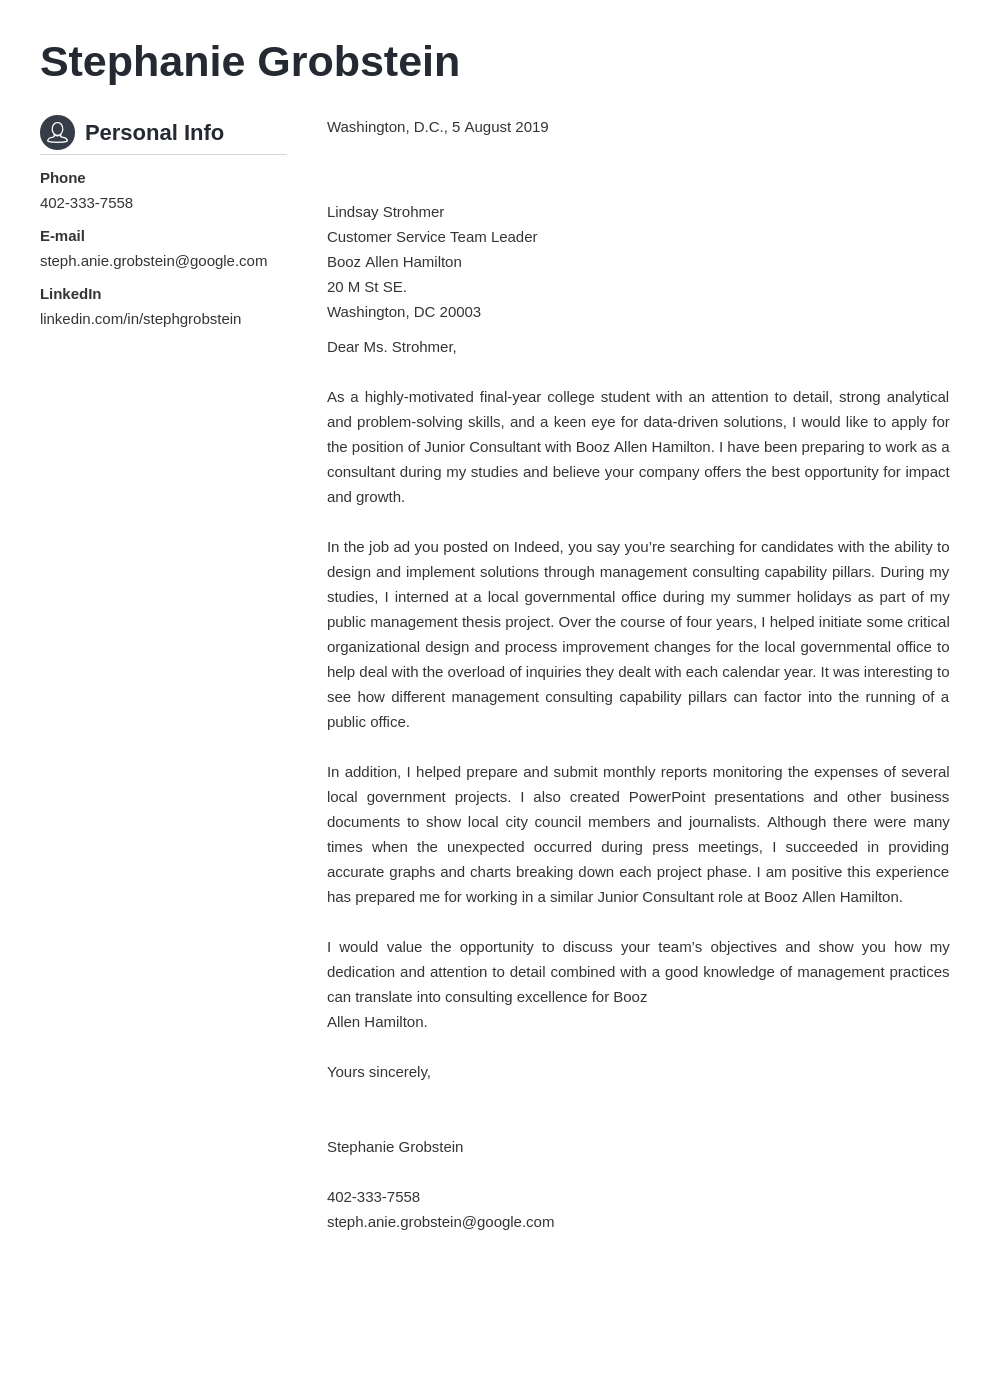 Consulting Cover Letter Example, Template, and Writing Tips